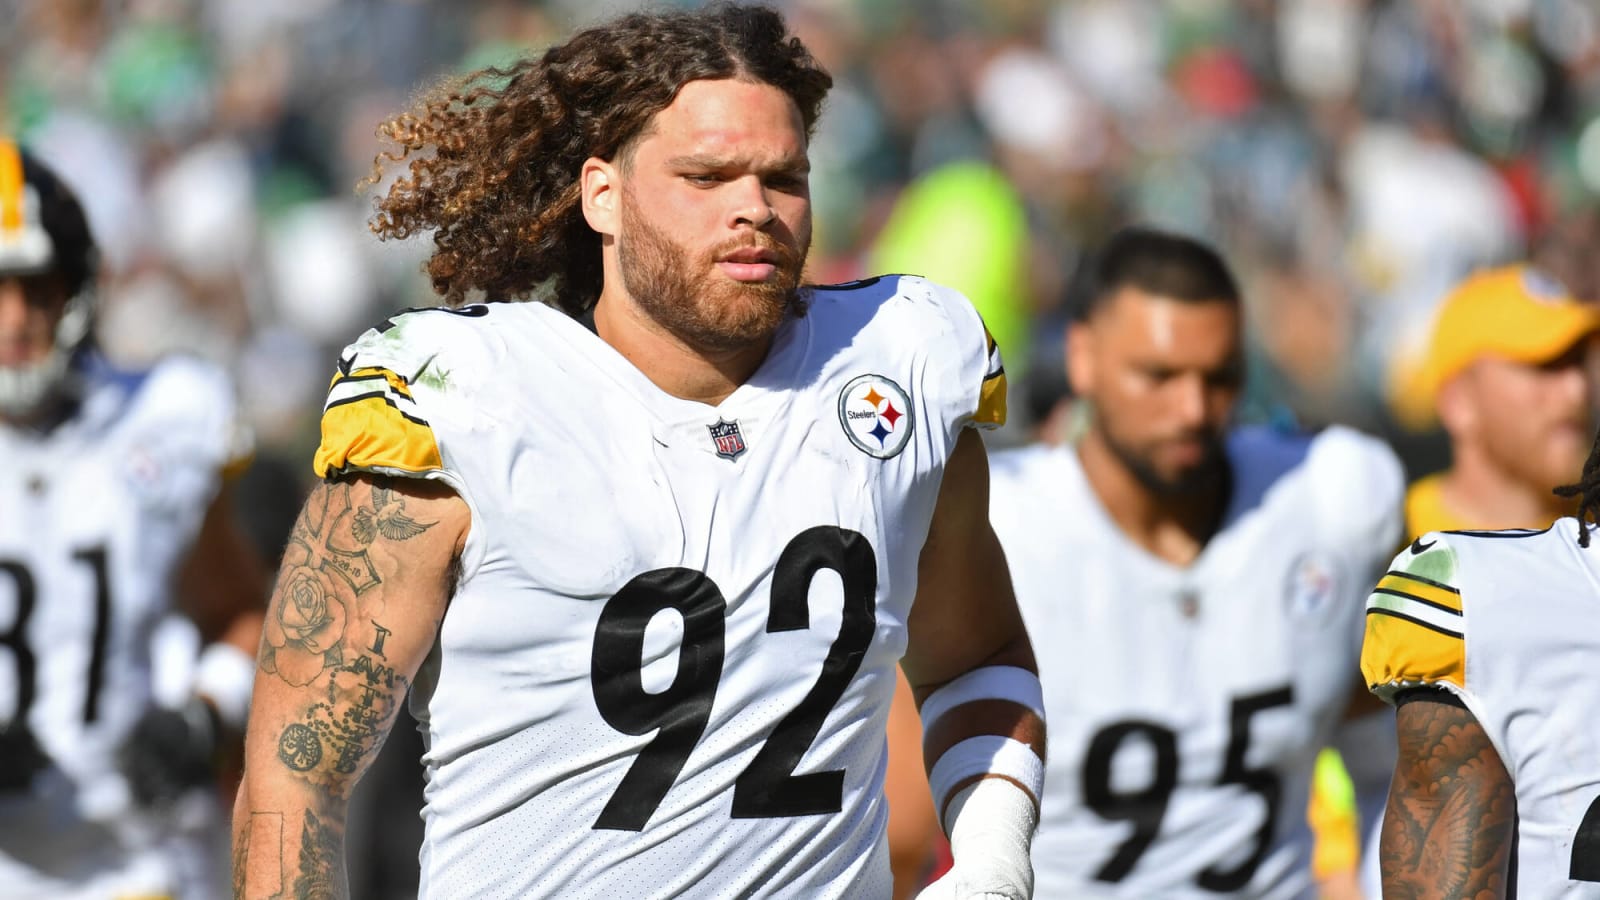 Steelers&#39; Roster Versatility Becoming A Strength, As Now Isaiahh Loudermilk Sees Snaps At OLB